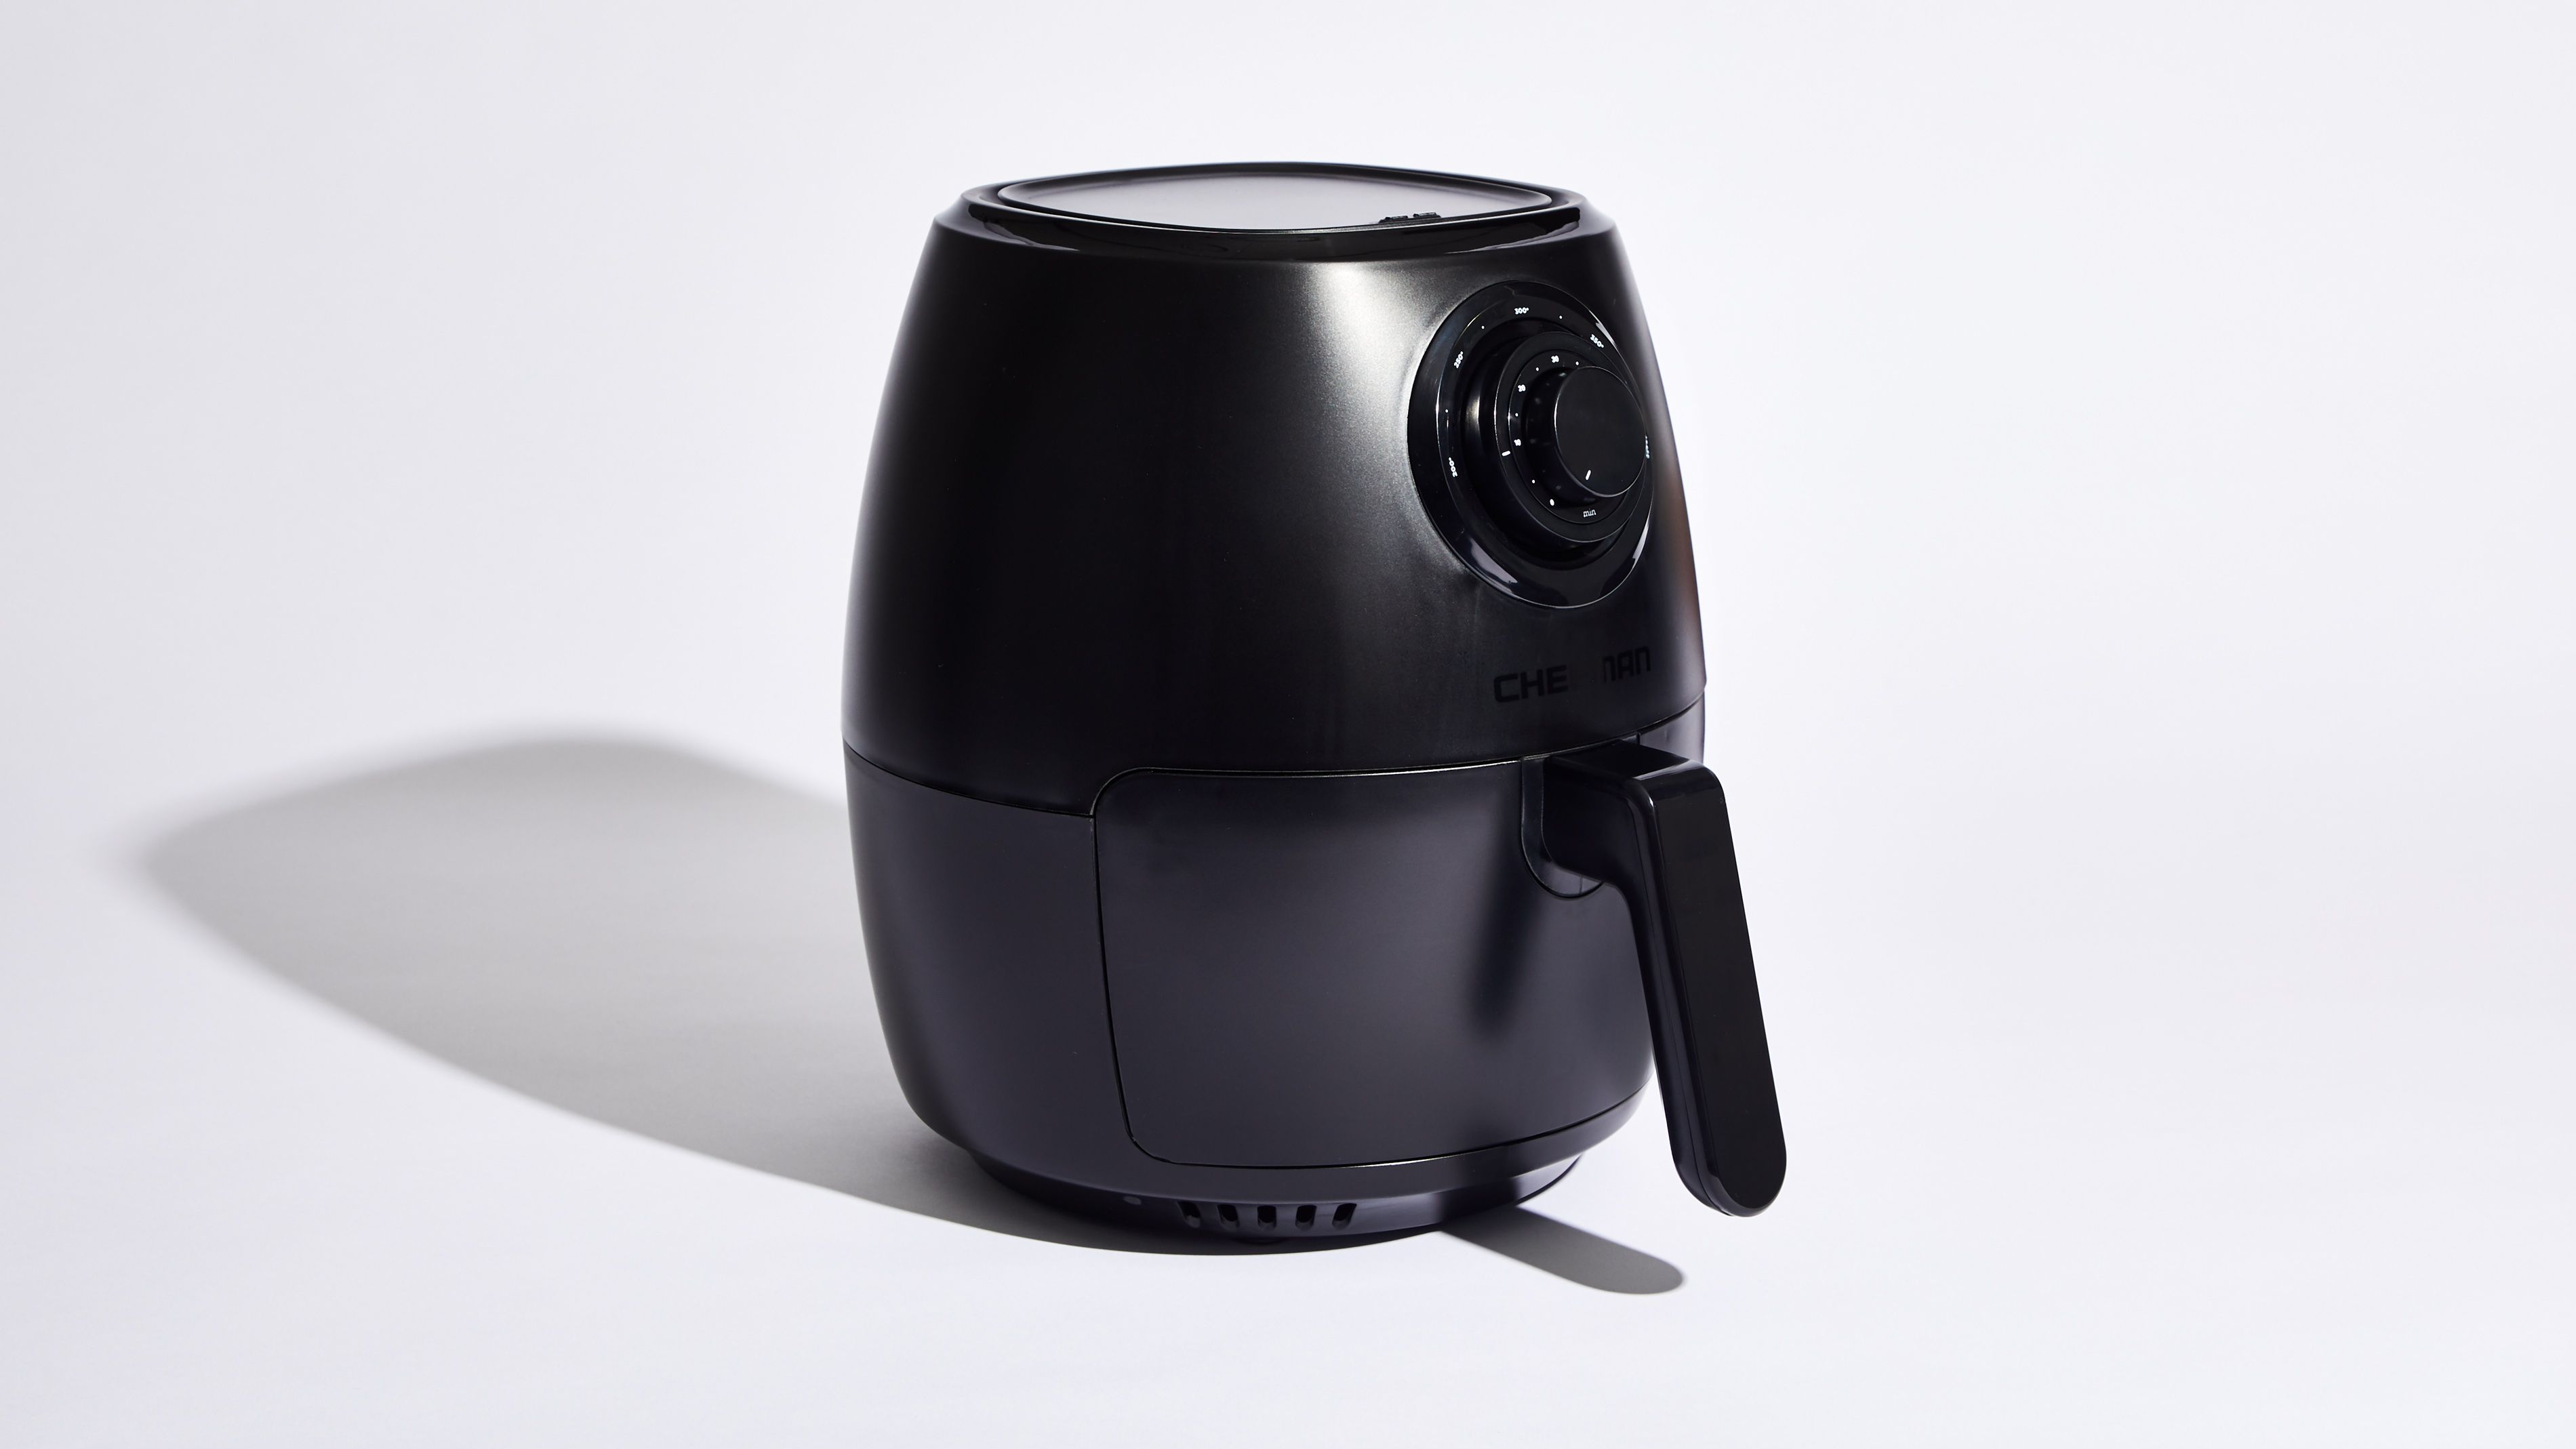 Chefman TurboFry Air Fryer Review - Top Reviewed Compact Air Fryer Oven